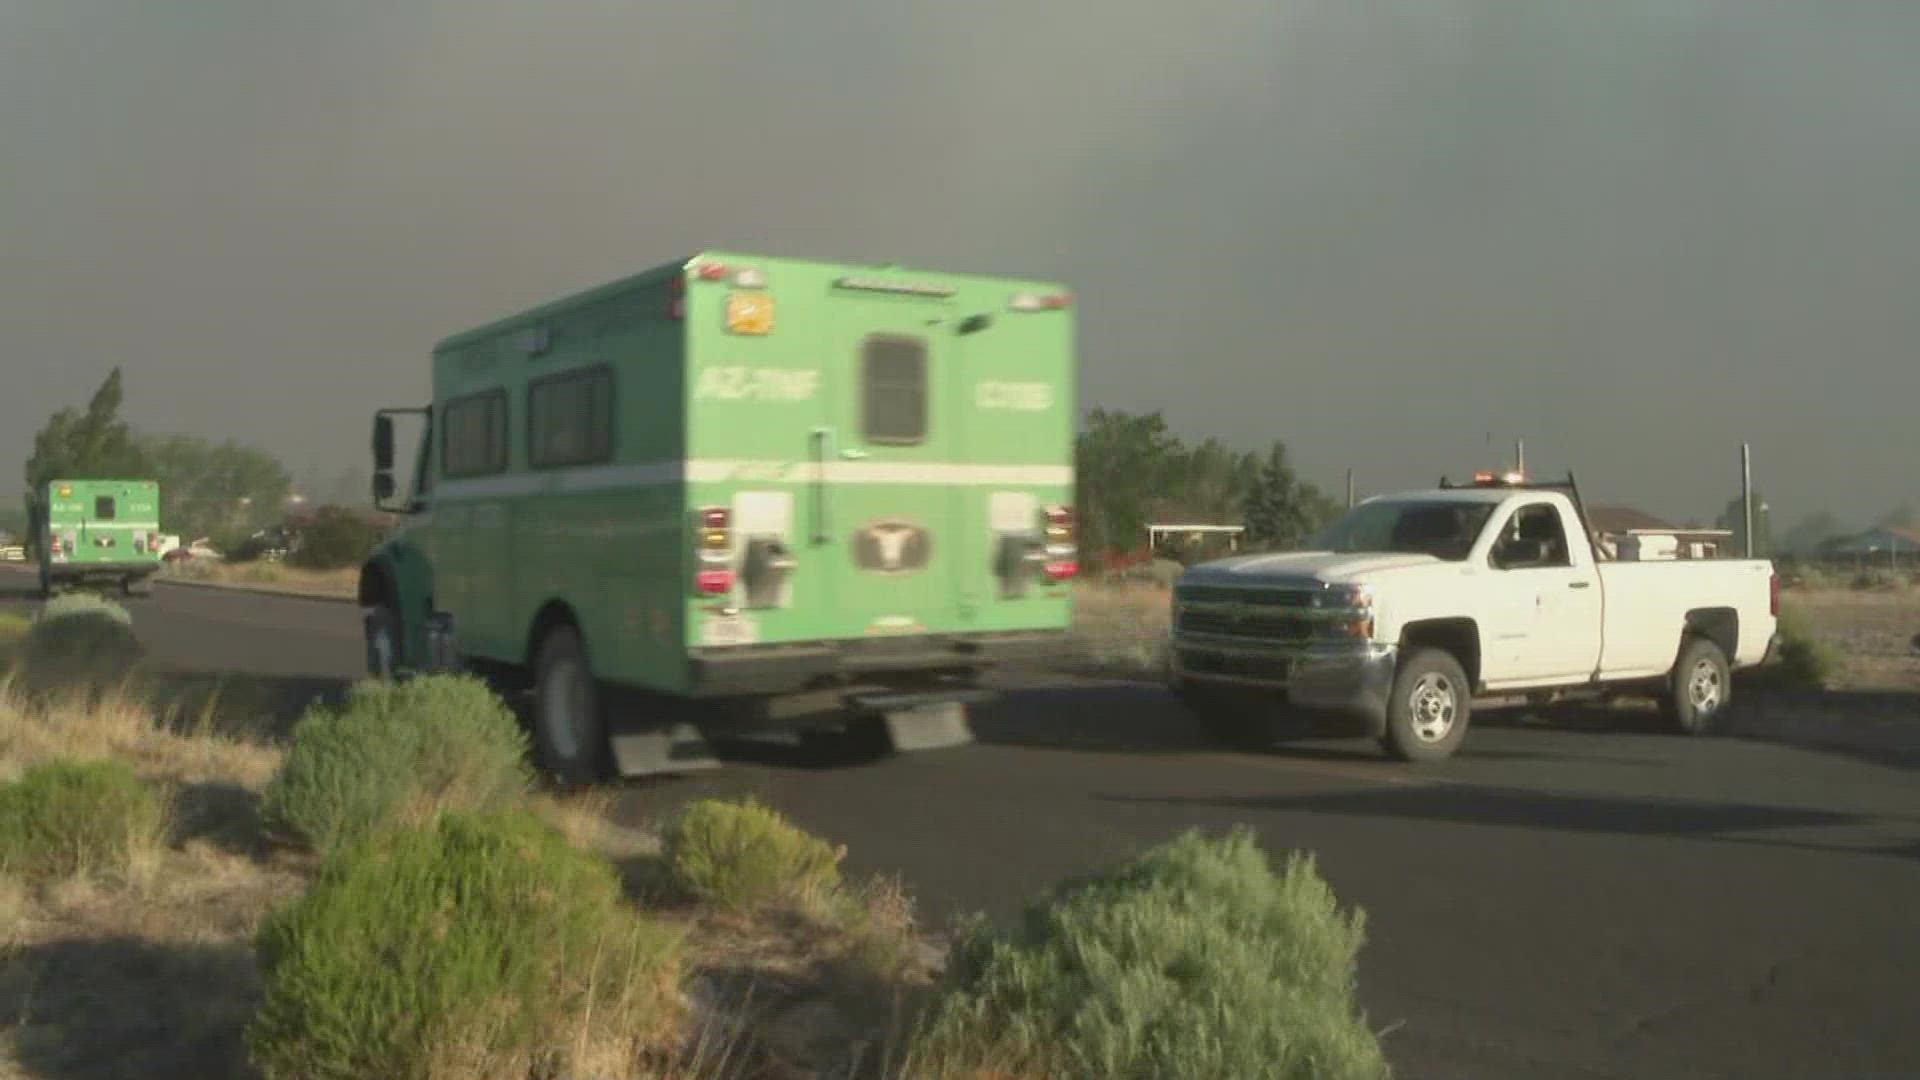 Sparked on June 12, the Pipeline Fire continues to burn near the Flagstaff area. Michael Doudna has the latest update.